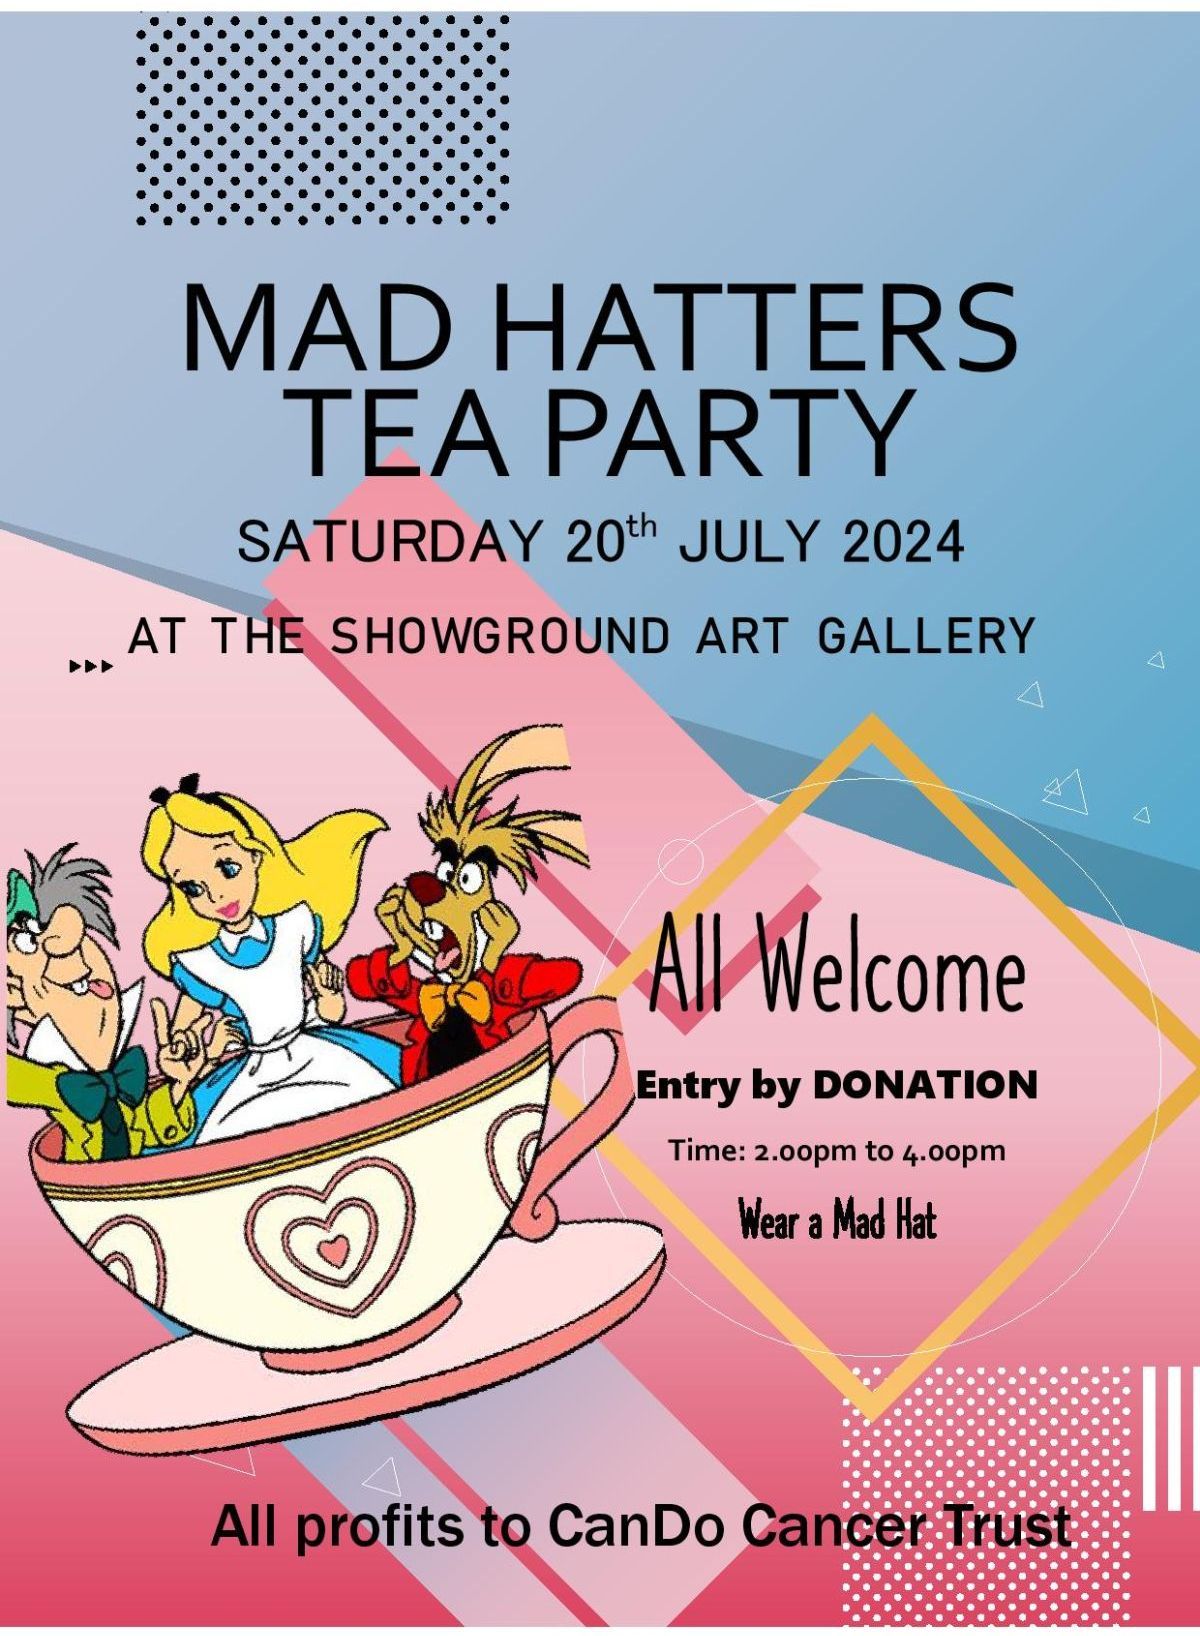 Fundraiser - Mad Hatters Tea Party